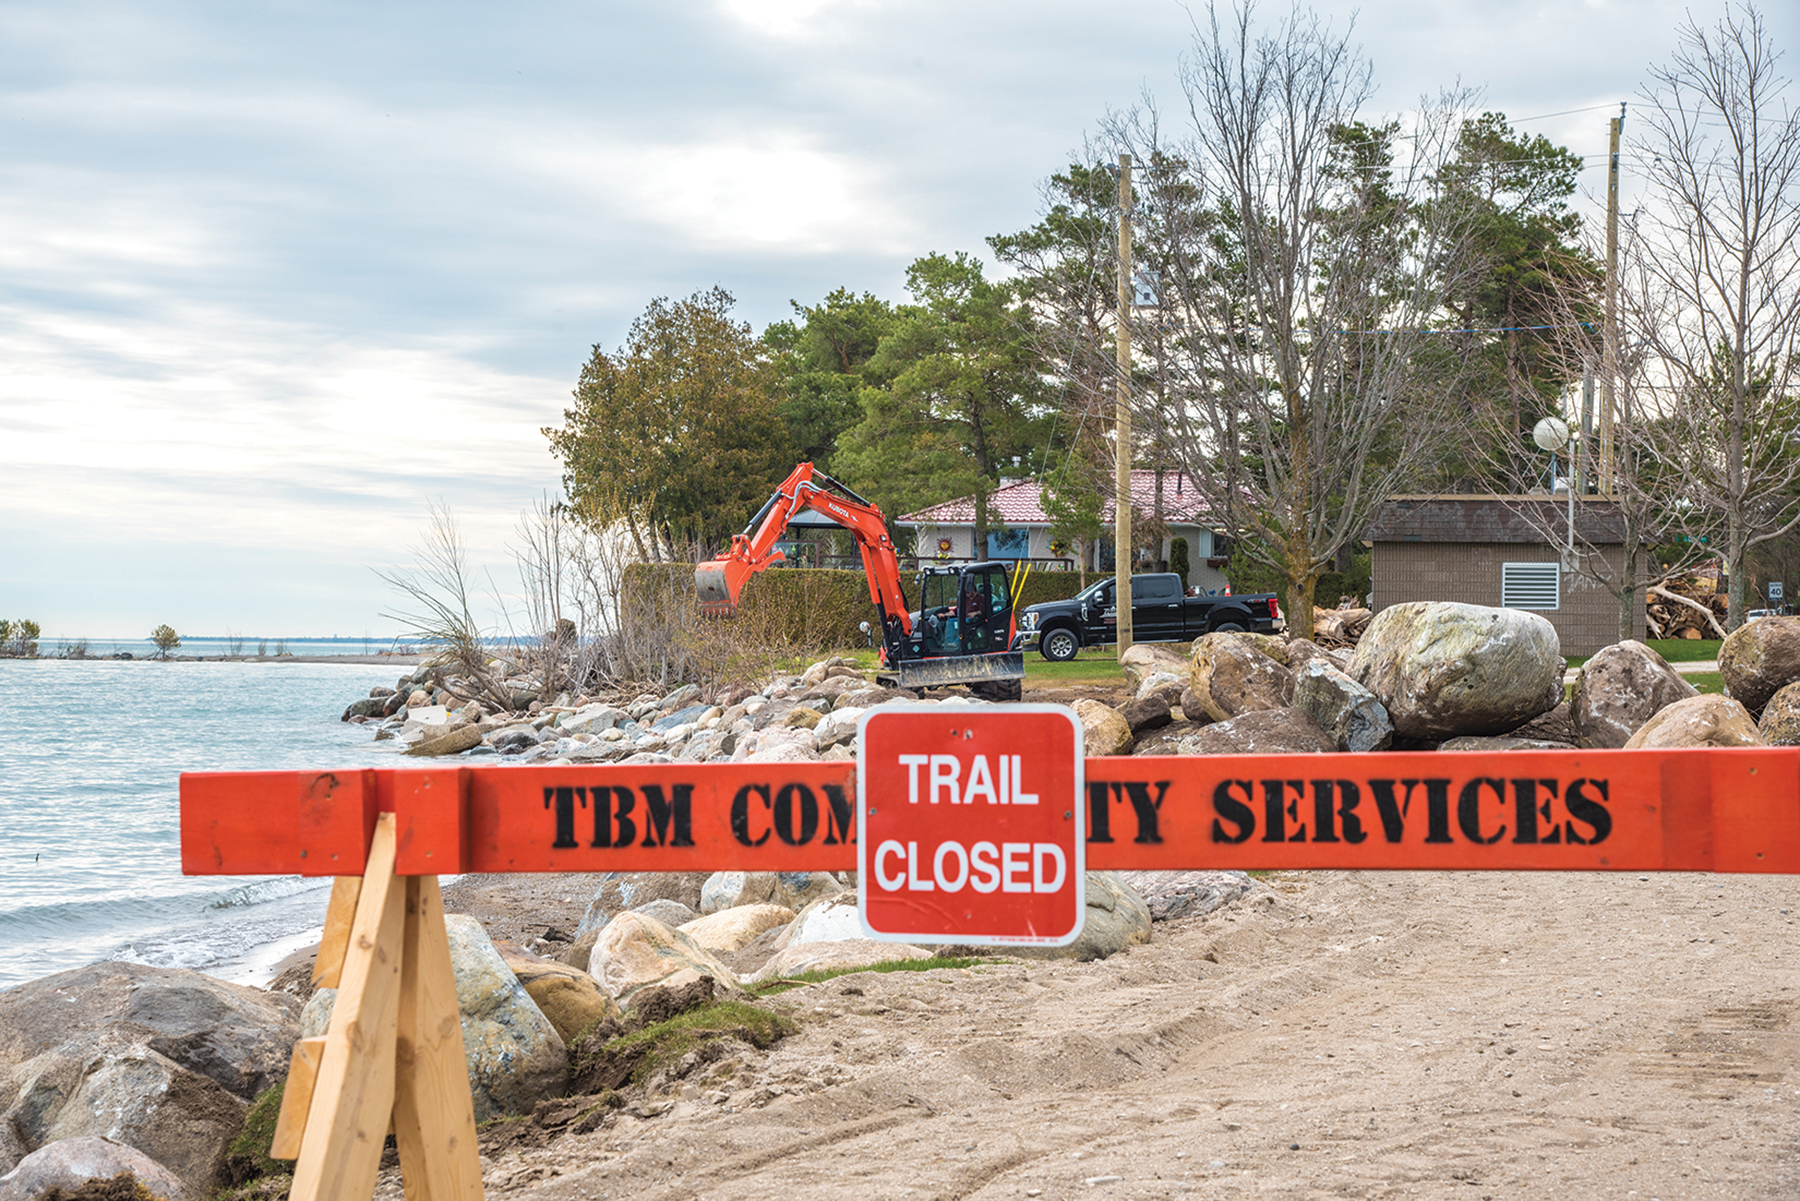 The trail at Bayview Park in Thornbury was closed for waterfront repairs last spring.